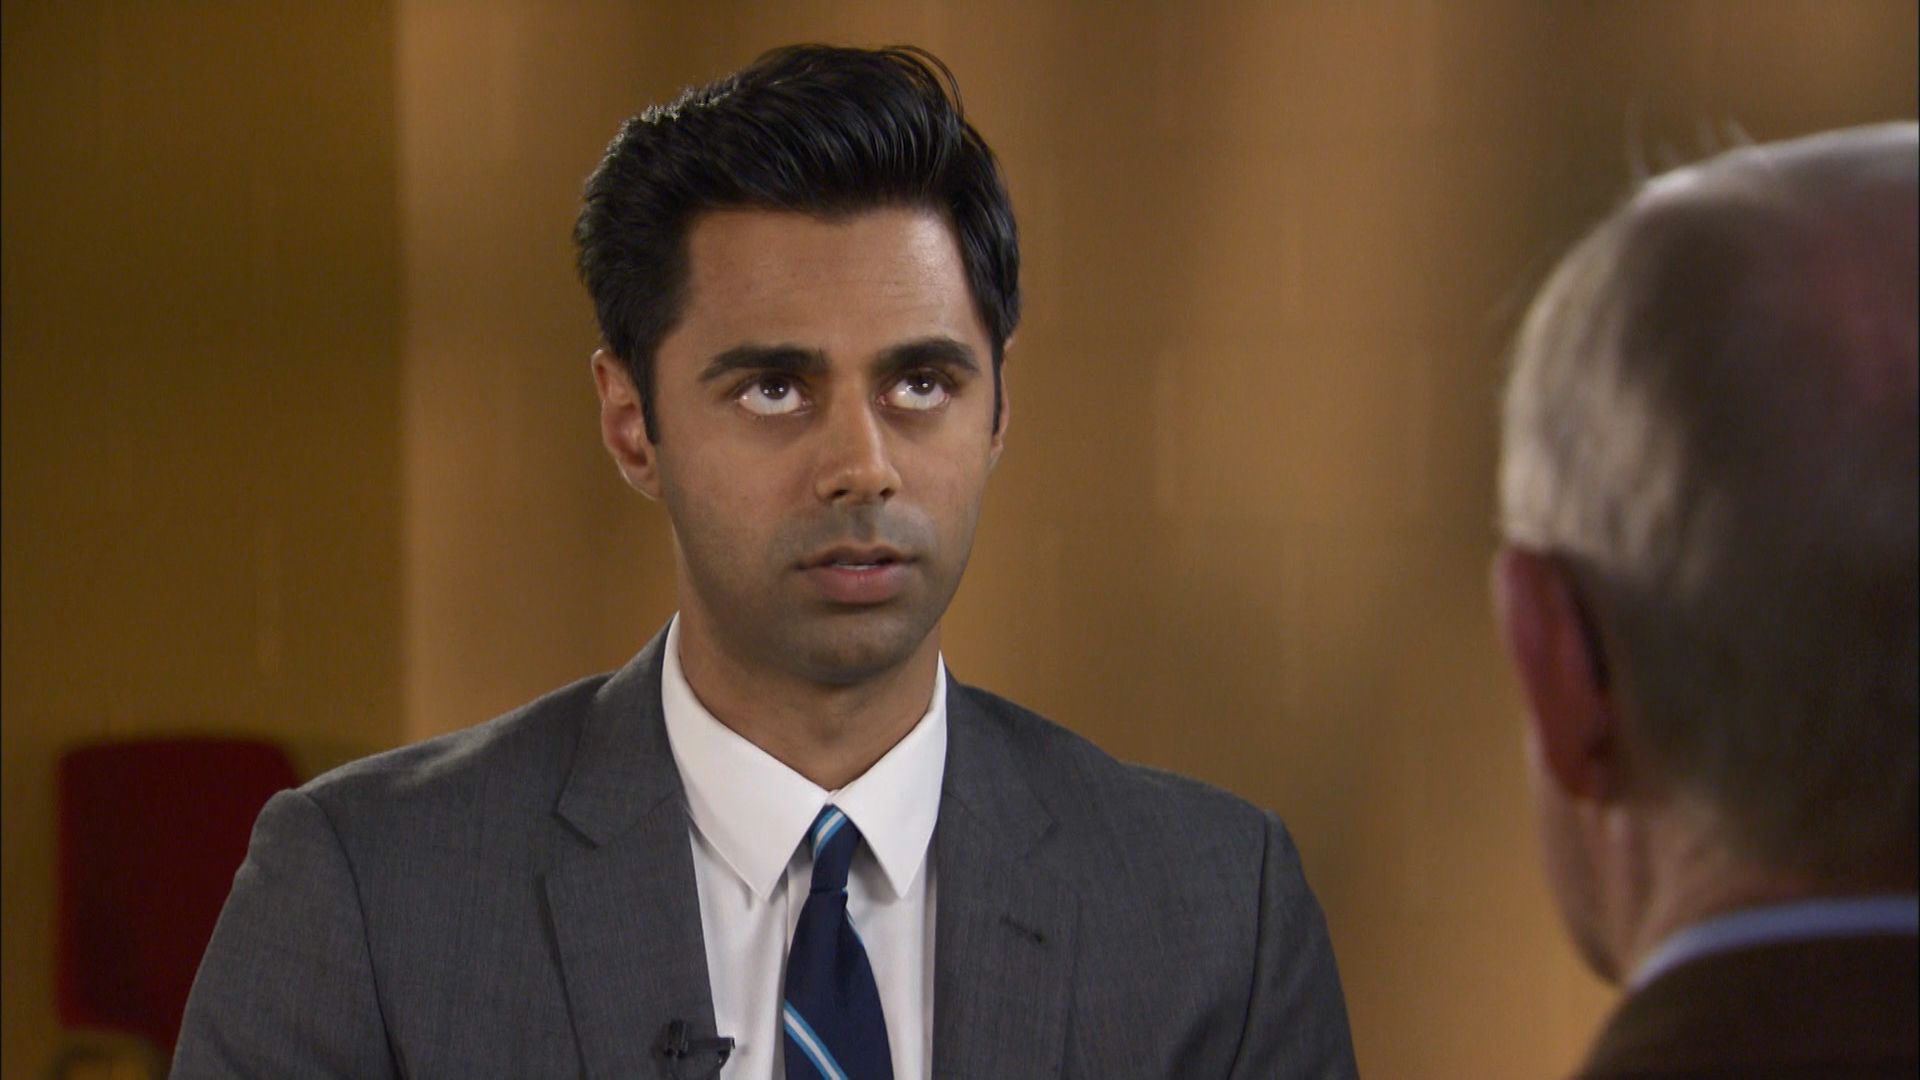 Content Moderation And Free Speech | Patriot Act with Hasan Minhaj |  Netflix - YouTube